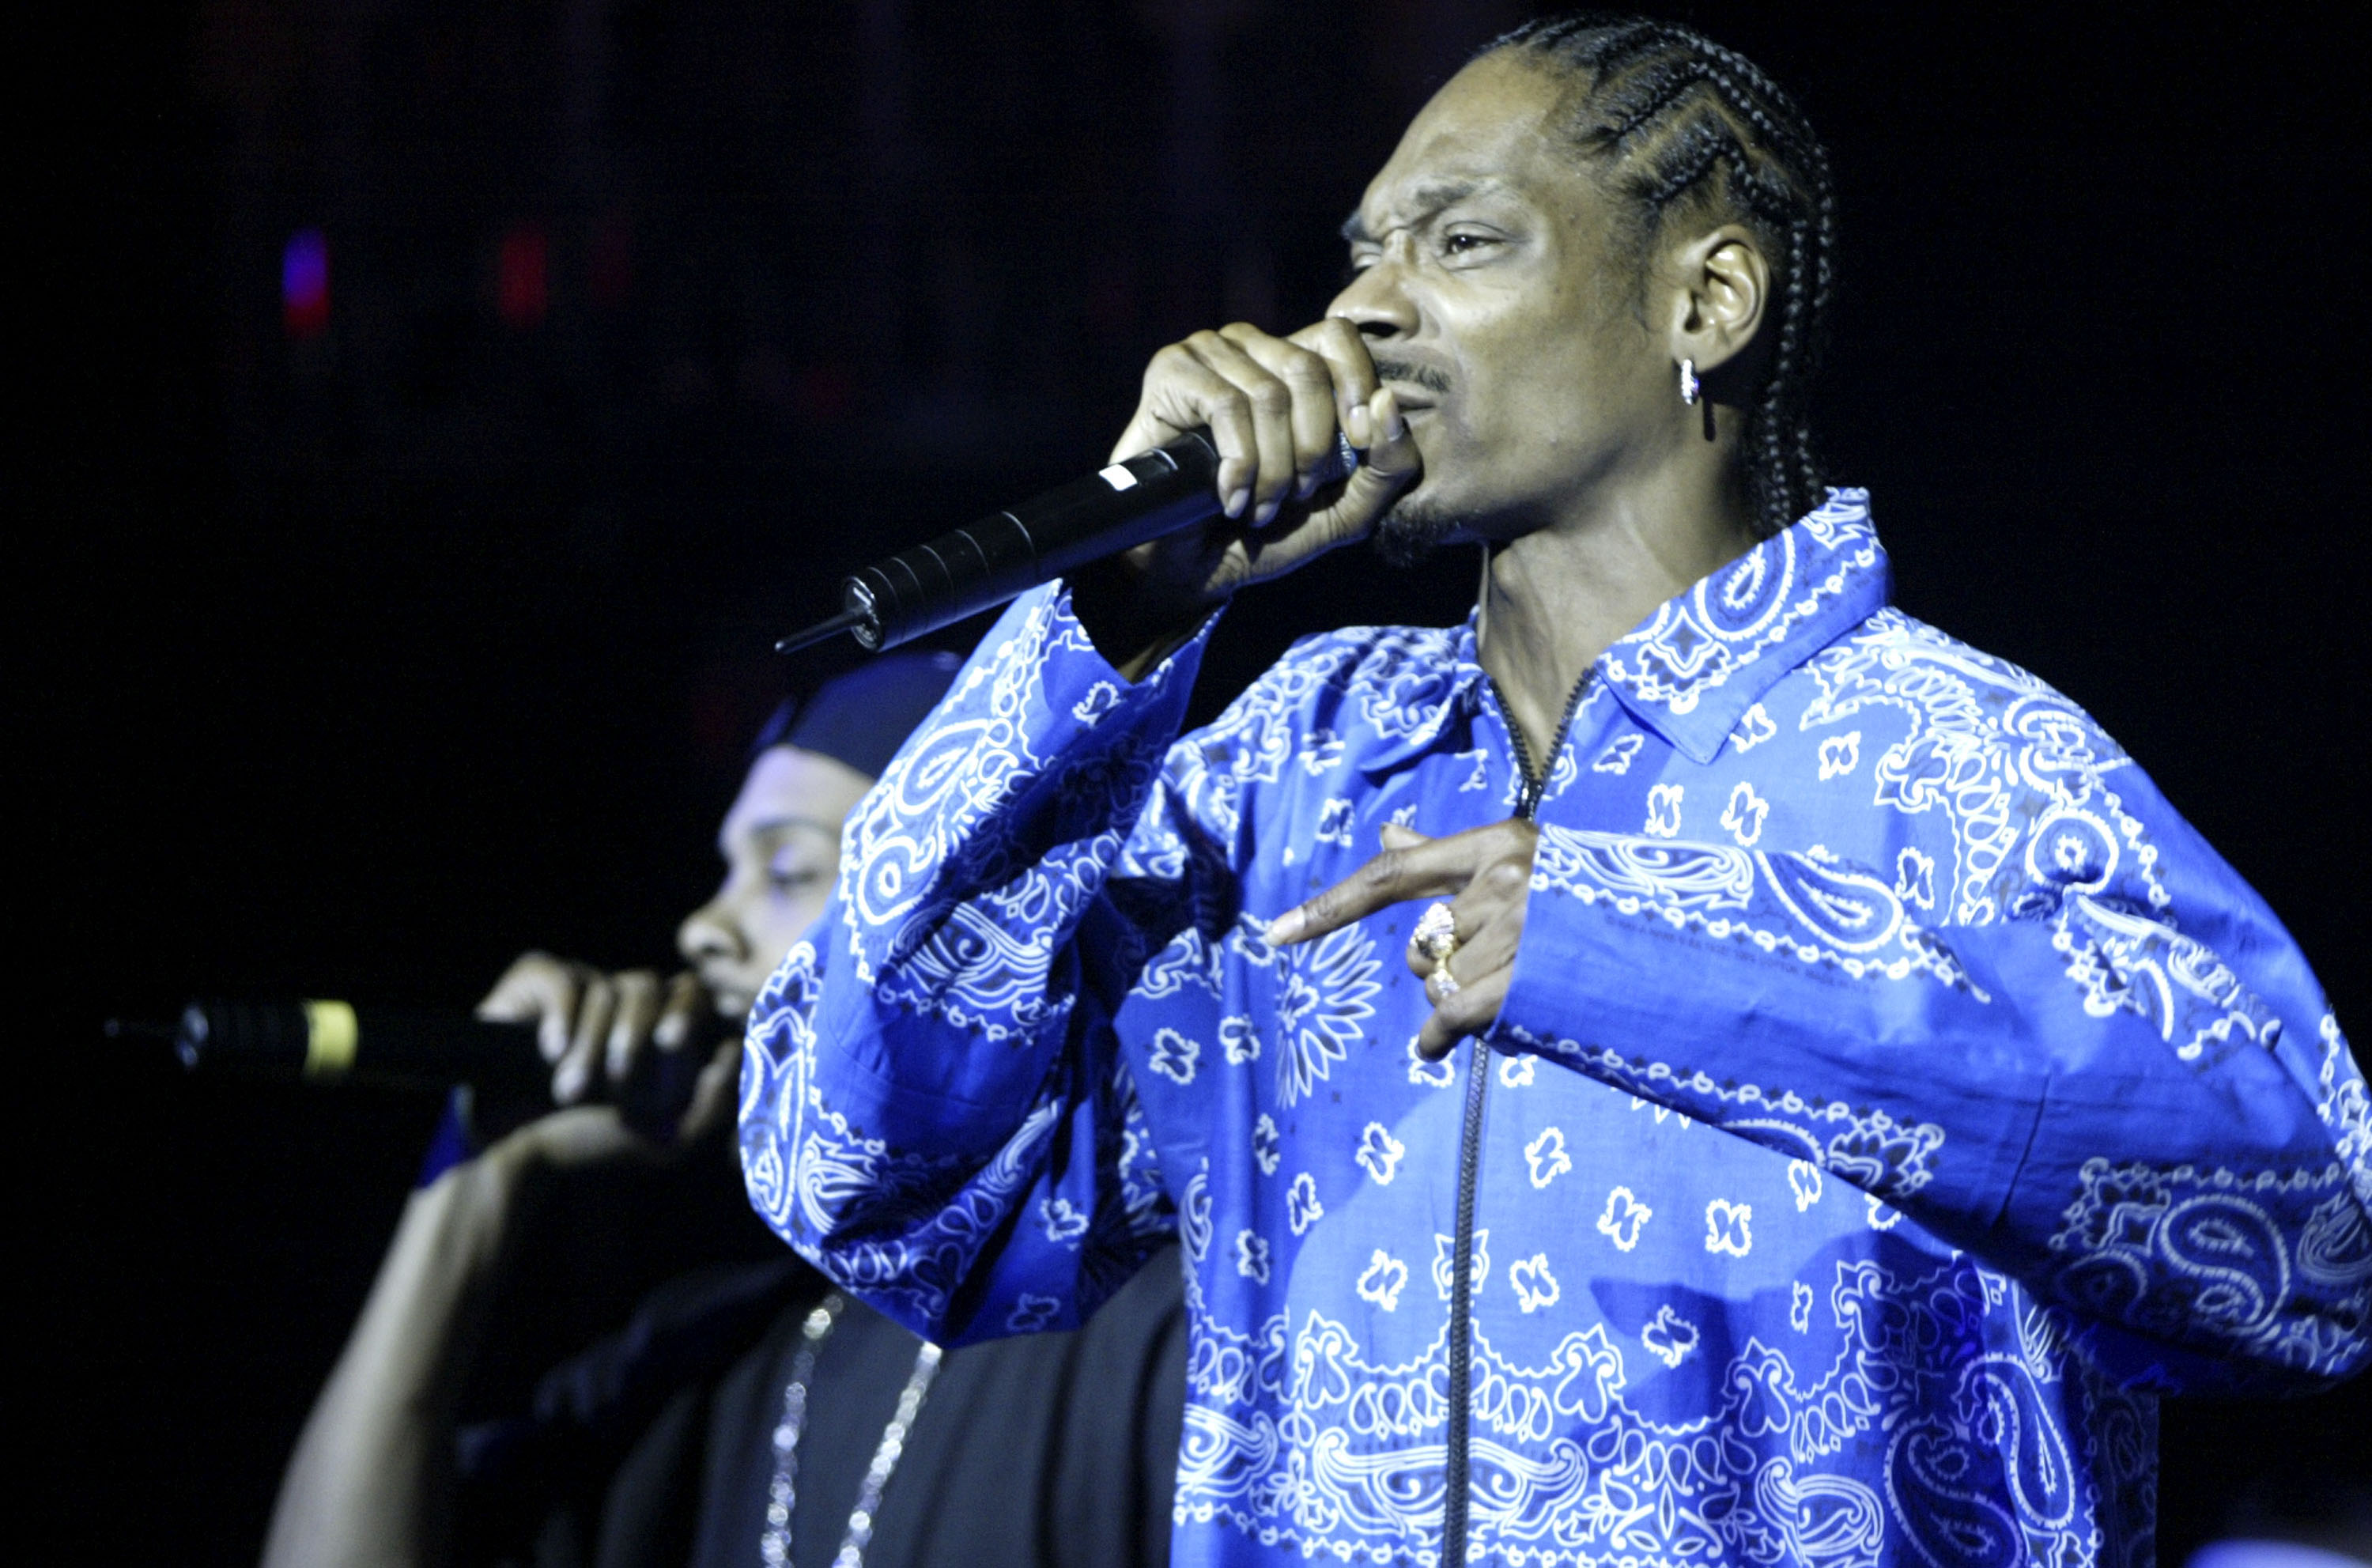 Snoop Dogg calls Los Angeles Kings game in broadcast booth